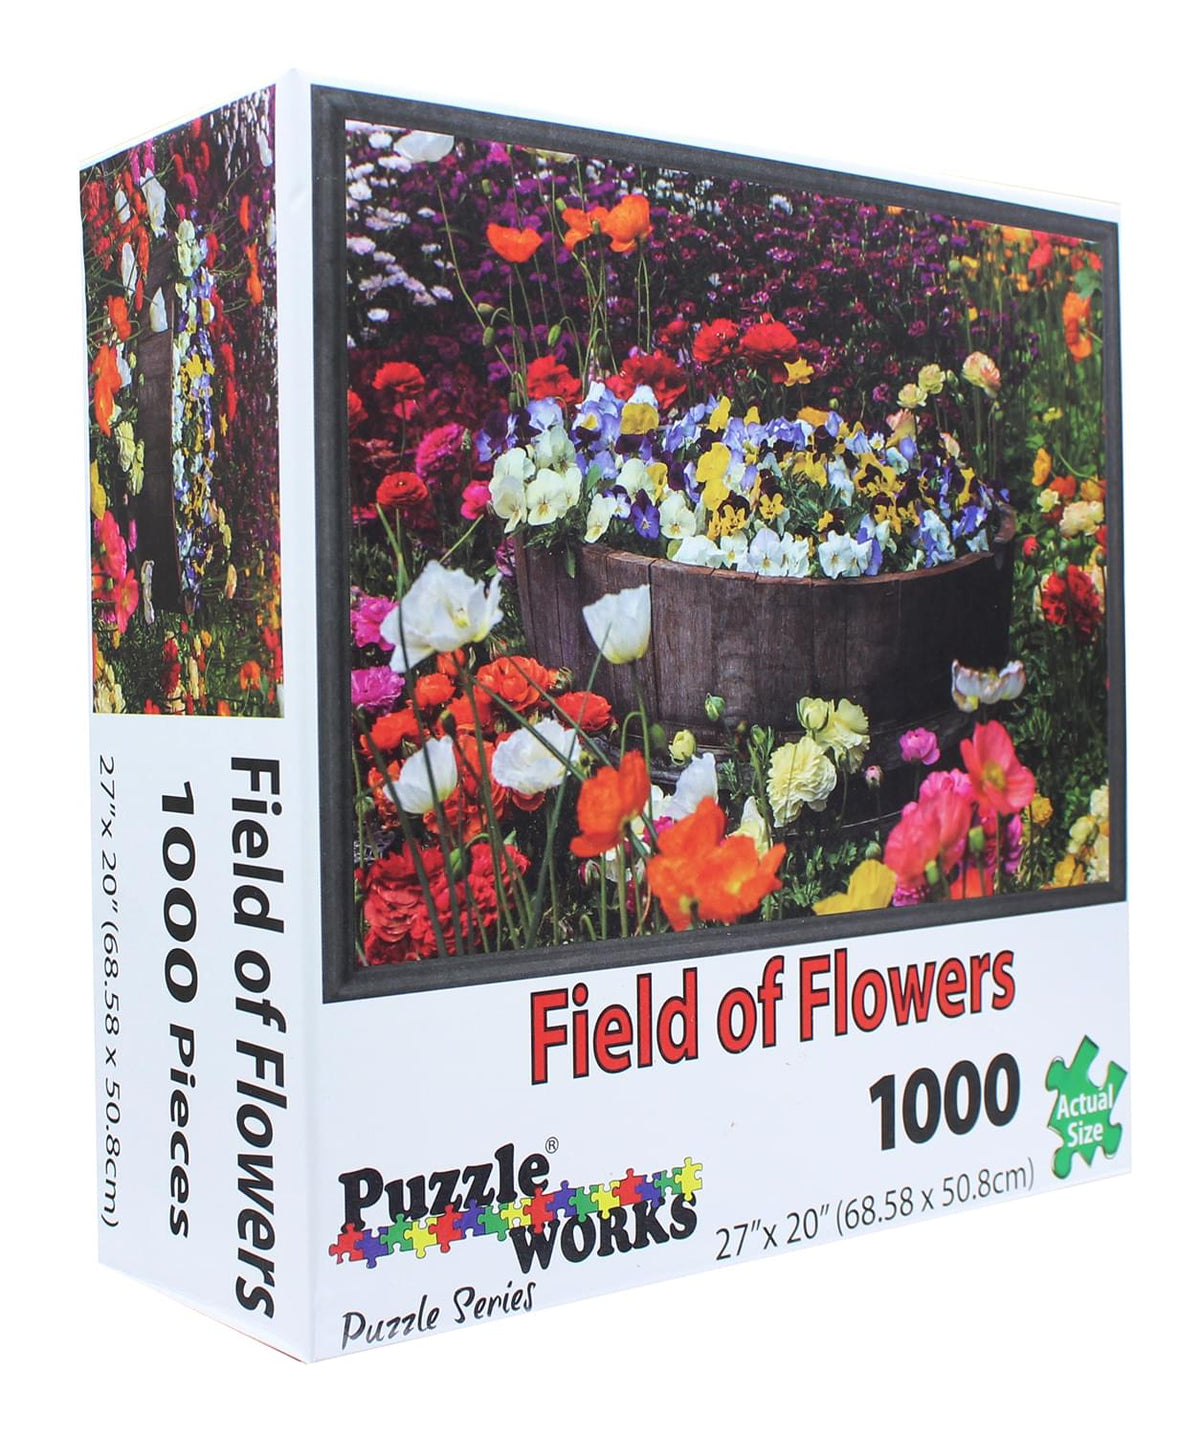 PuzzleWorks 1000 Piece Jigsaw Puzzle | Field Of Flowers | Free Shippin ...